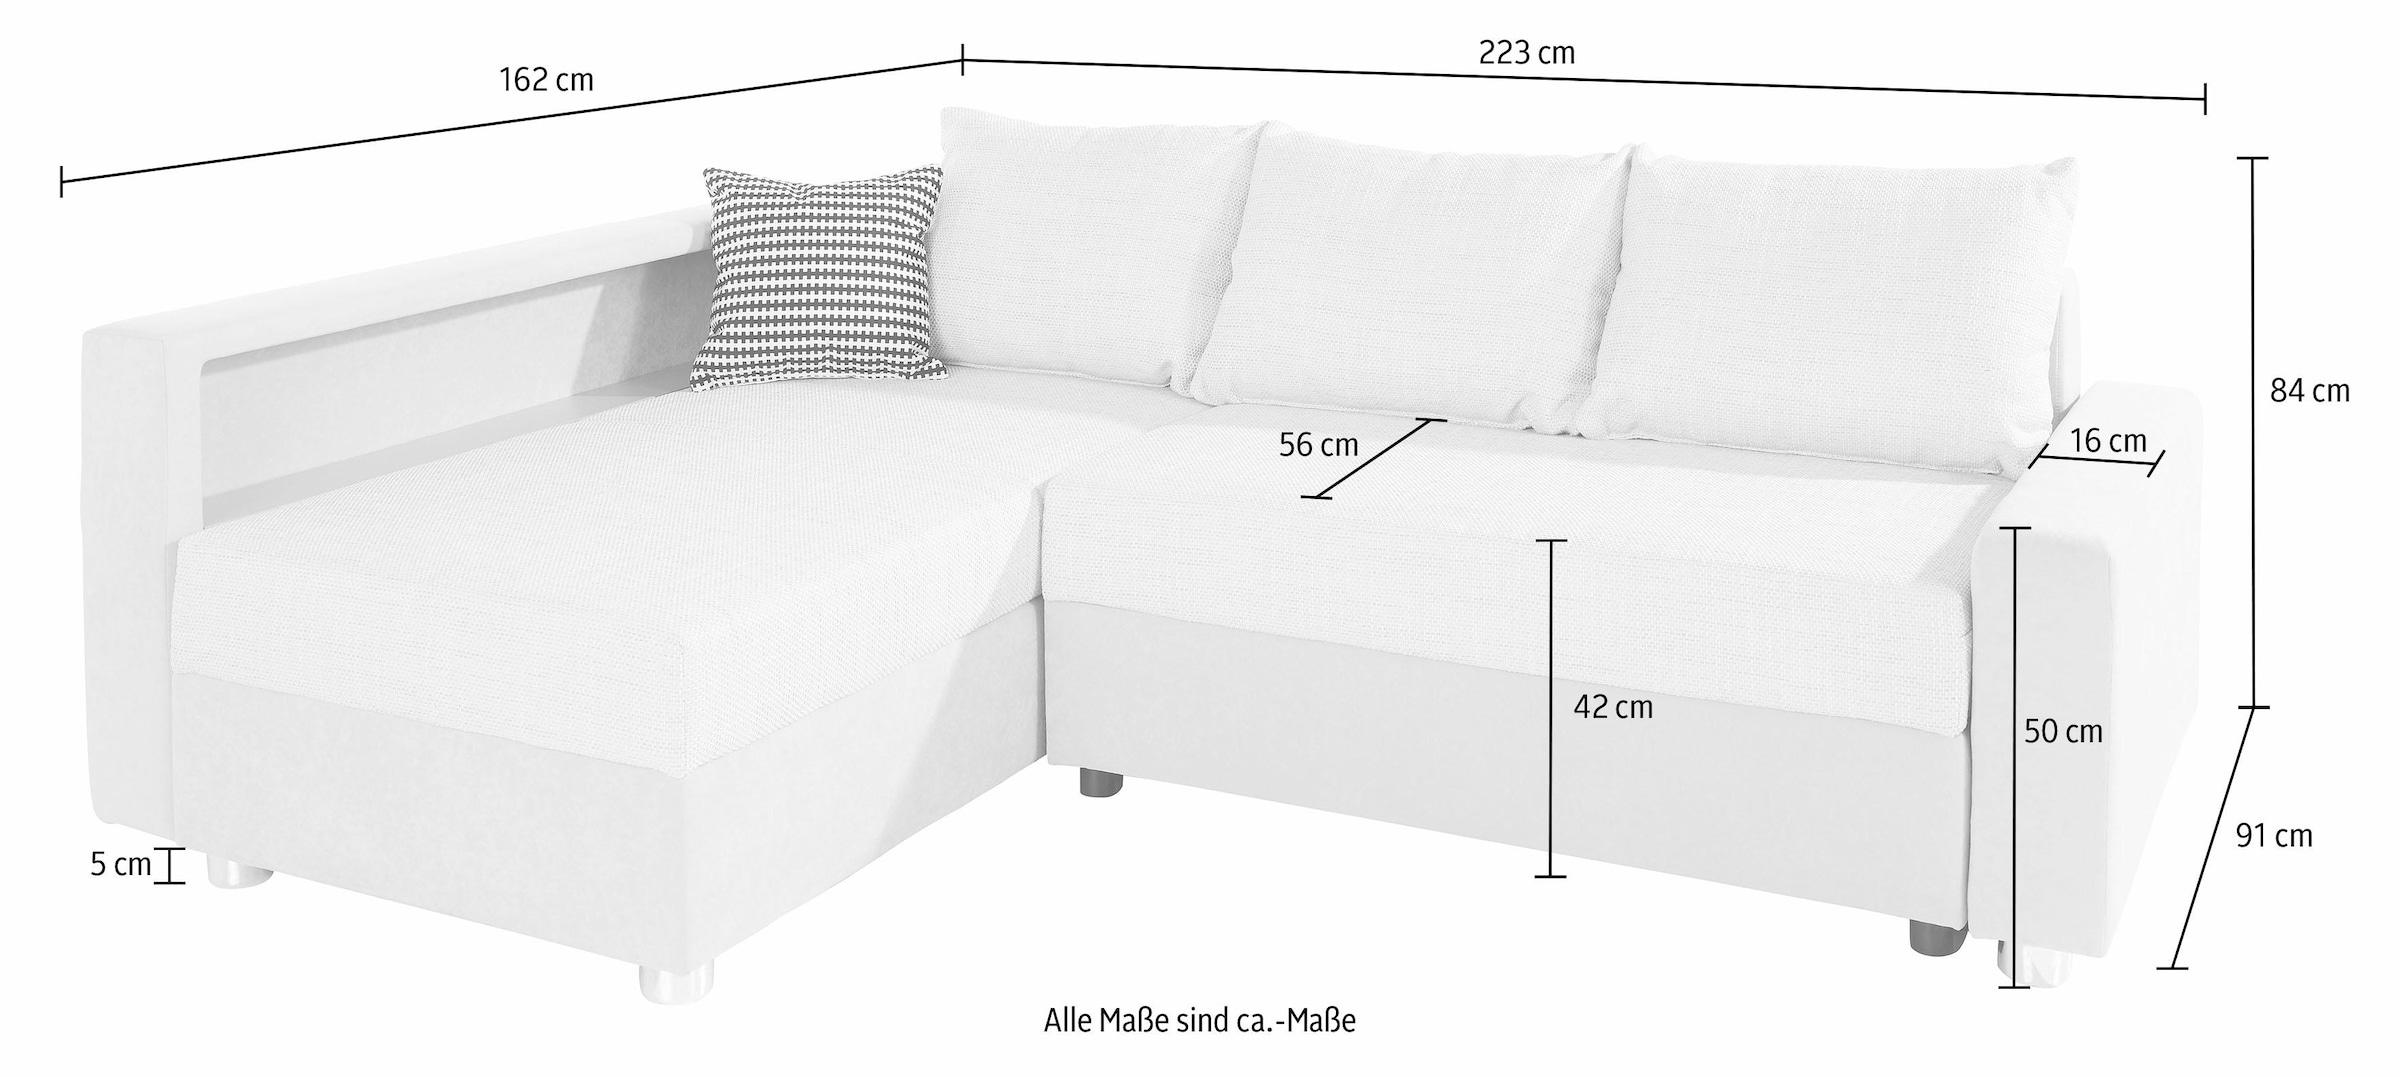 COLLECTION AB Ecksofa »Relax L-Form«, inklusive Bettfunktion, Federkern, wahlweise mit RGB-LED-Beleuchtung